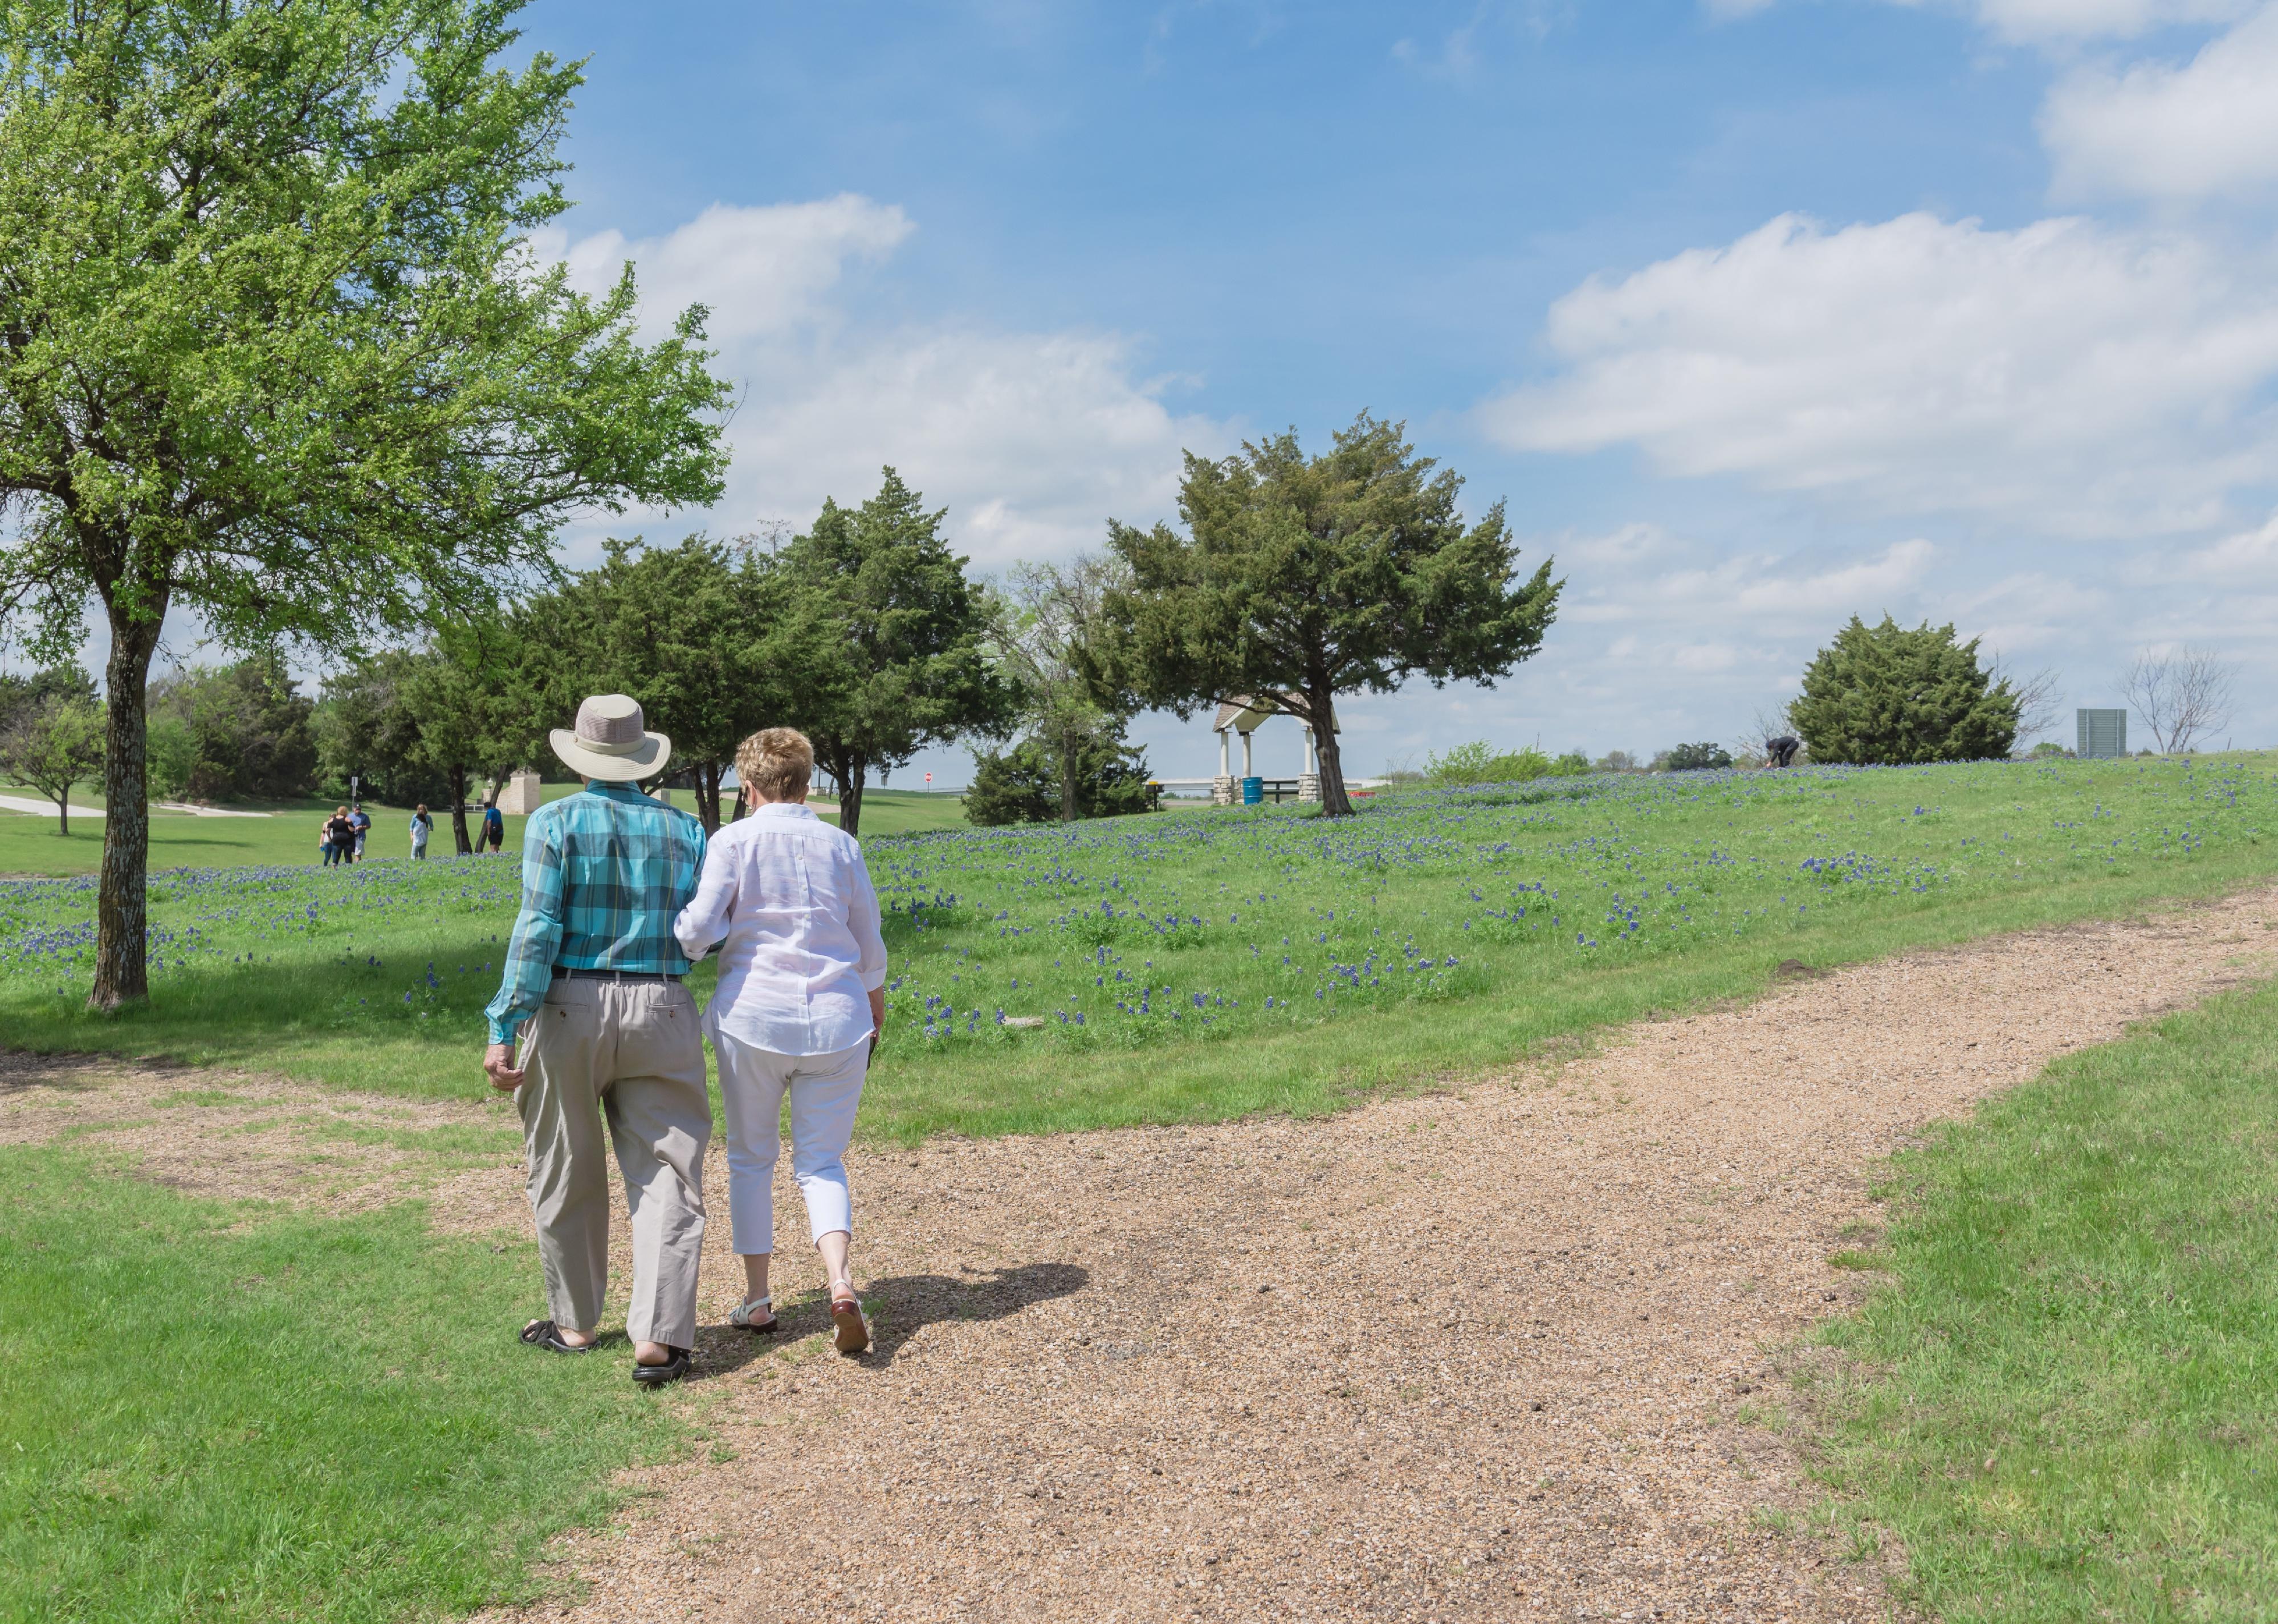 Rear view of senior couple walking on trail arm in arm.